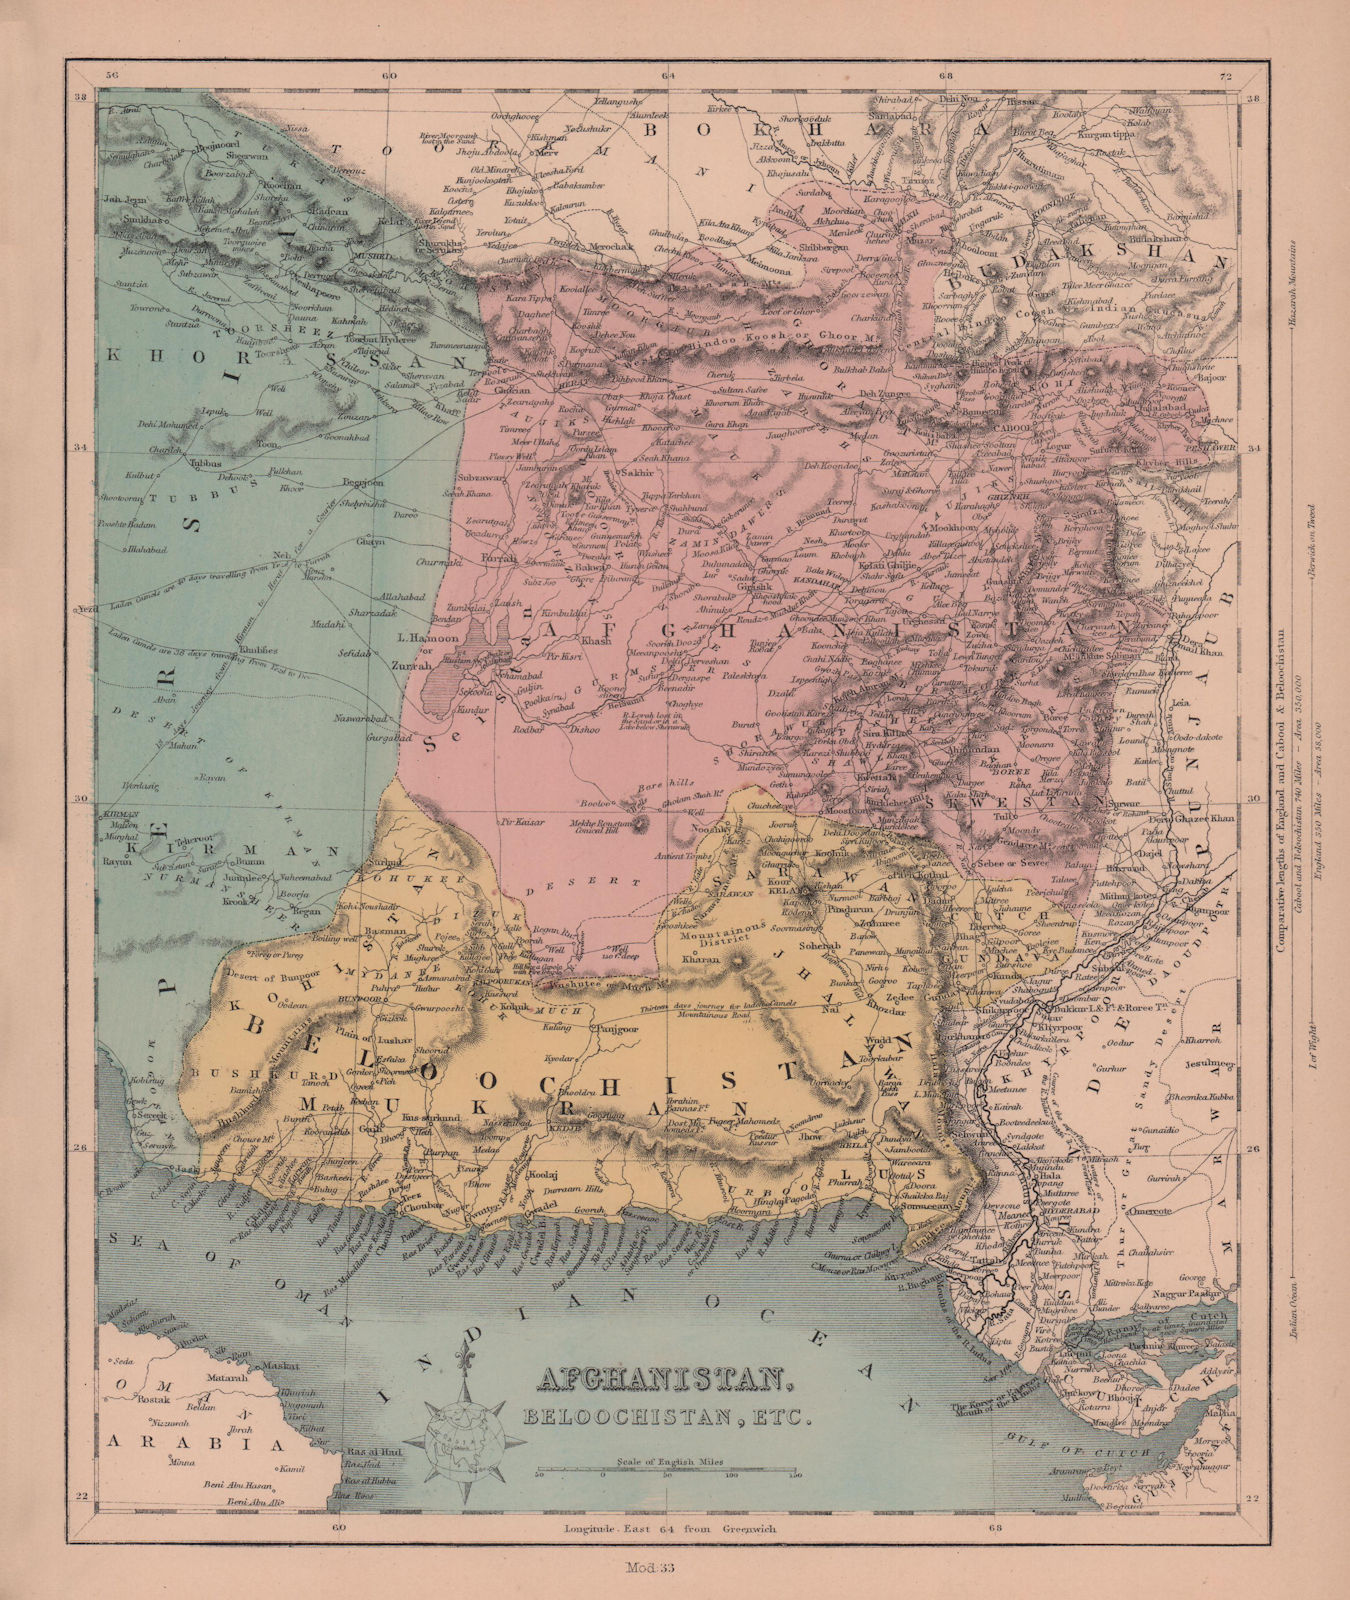 Associate Product Afghanistan & Beloochistan. Pakistan. South west Asia. HUGHES 1876 old map